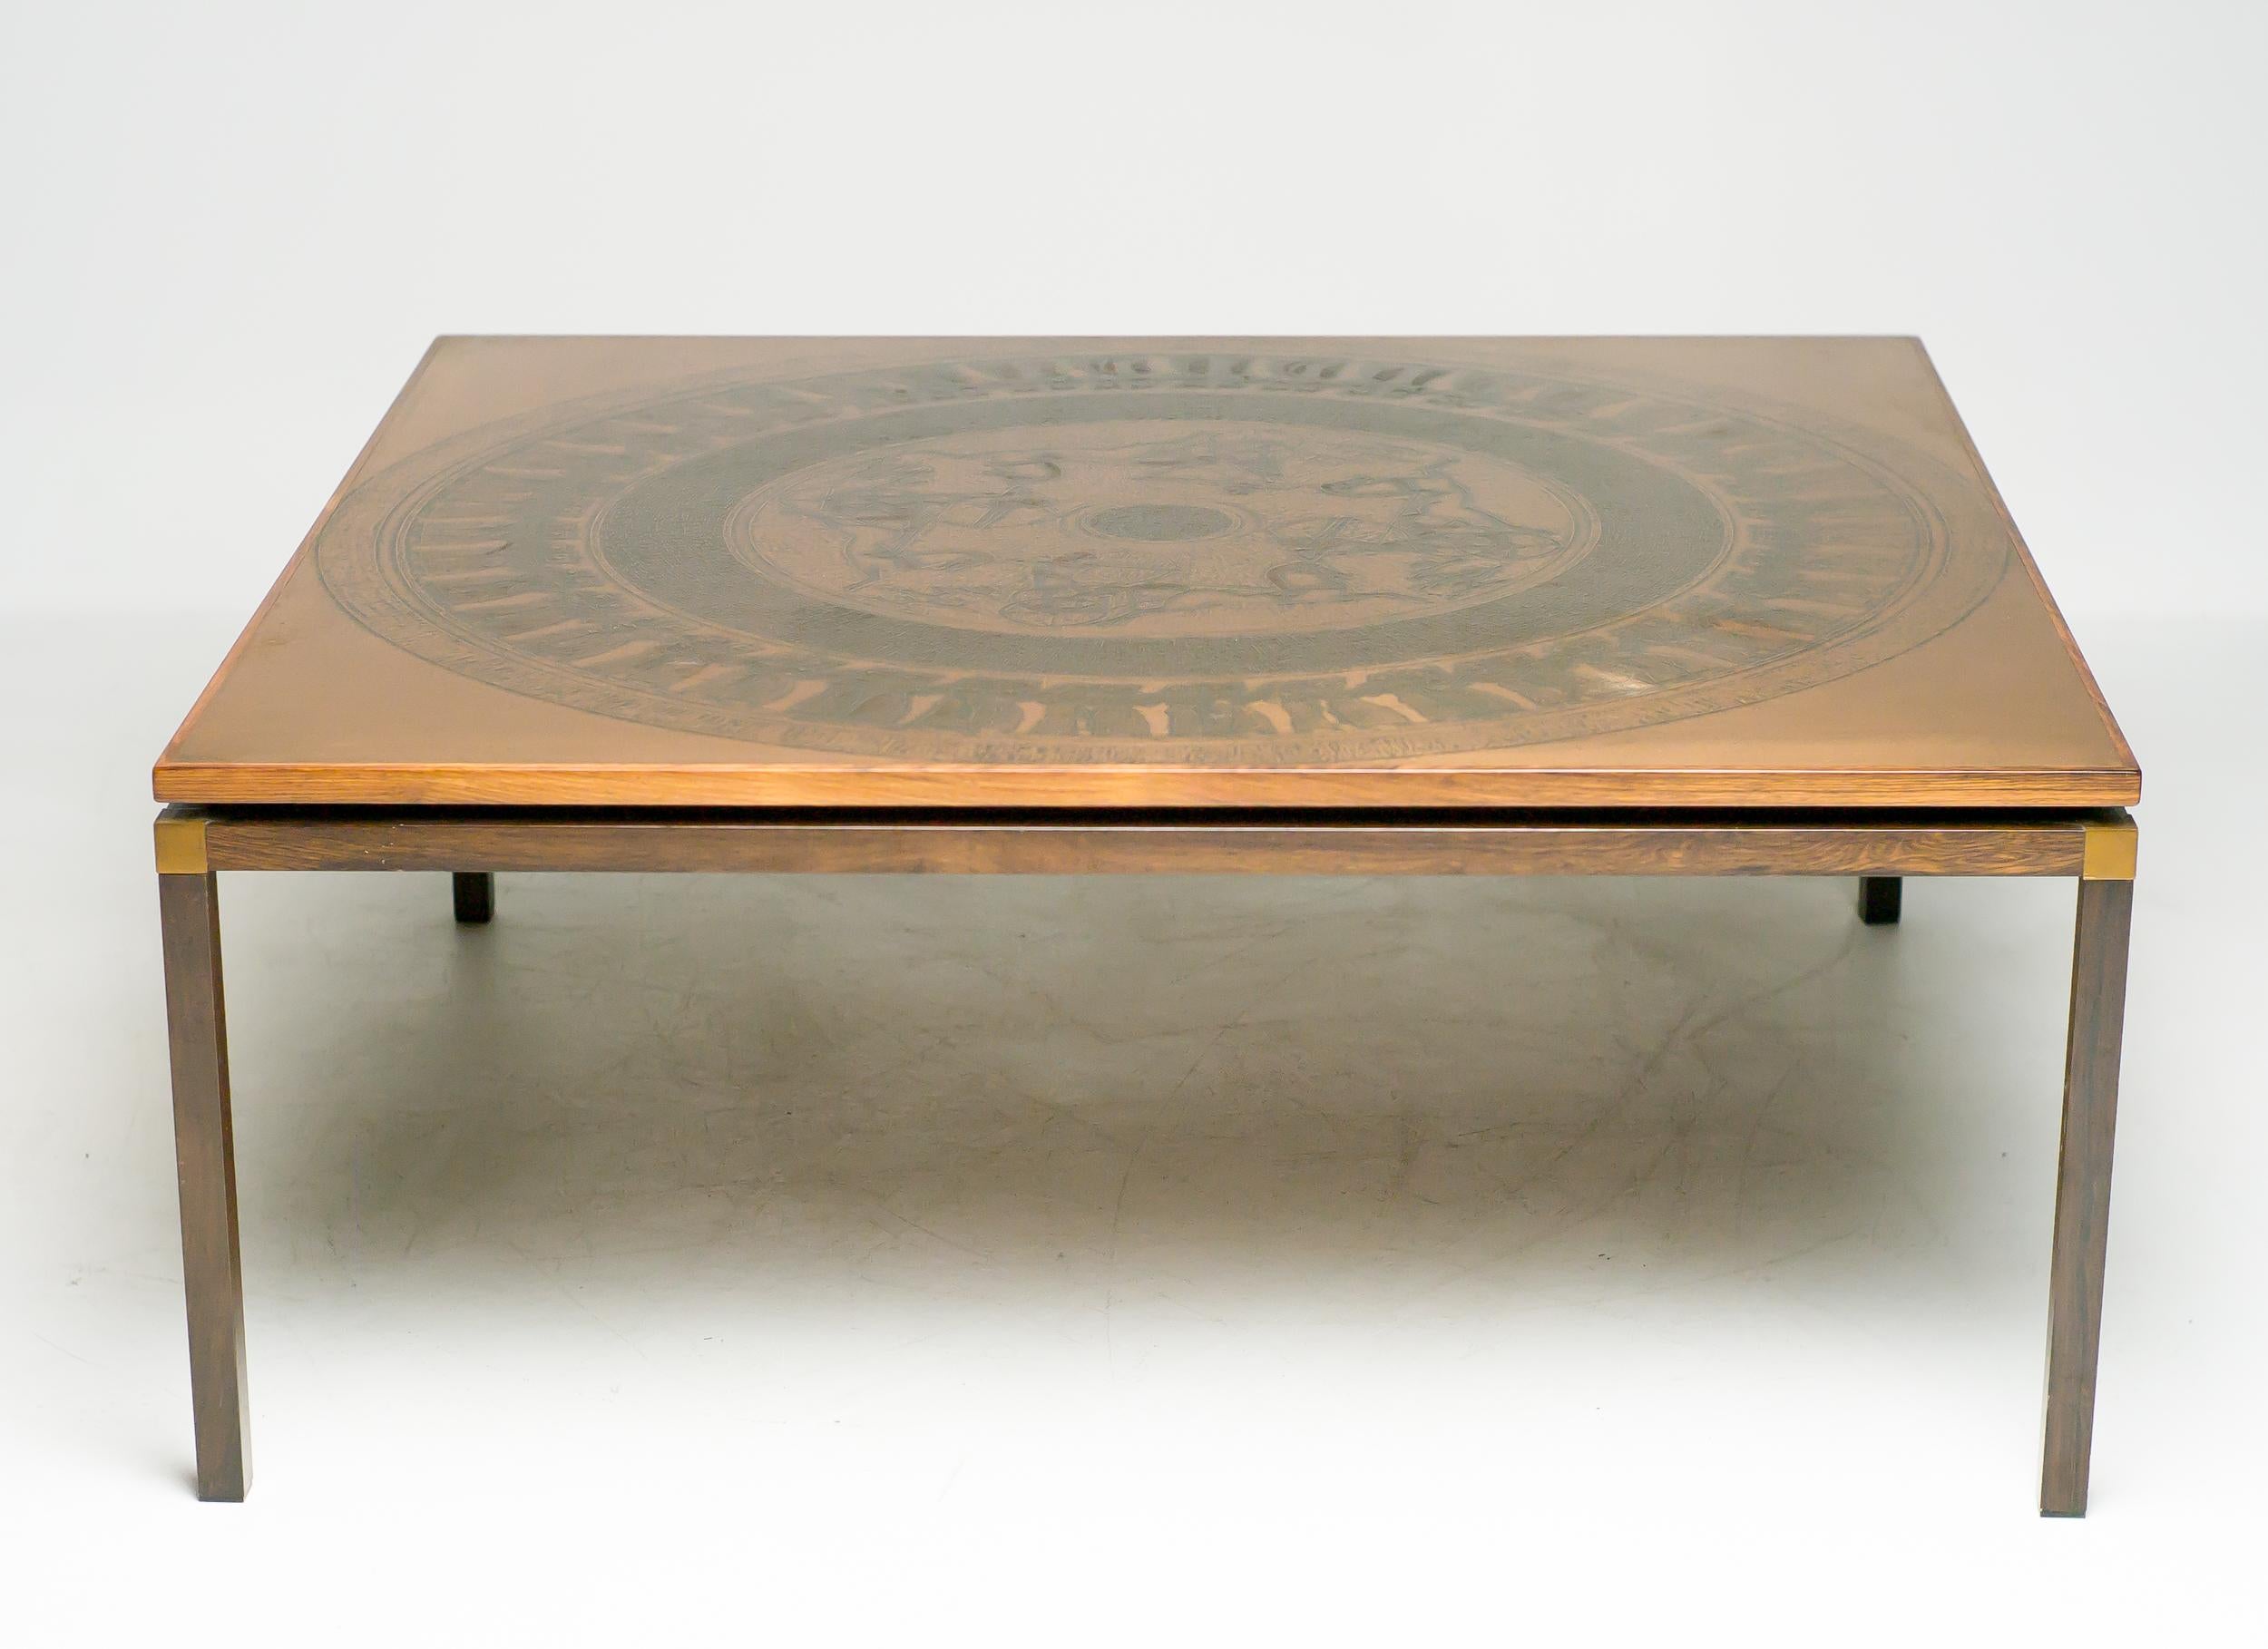 Scandinavian architectural coffee table with embossed copper tabletop with ancient Egyptian Farao period decoration, rosewood and copper frame, Denmark, circa 1970.
  